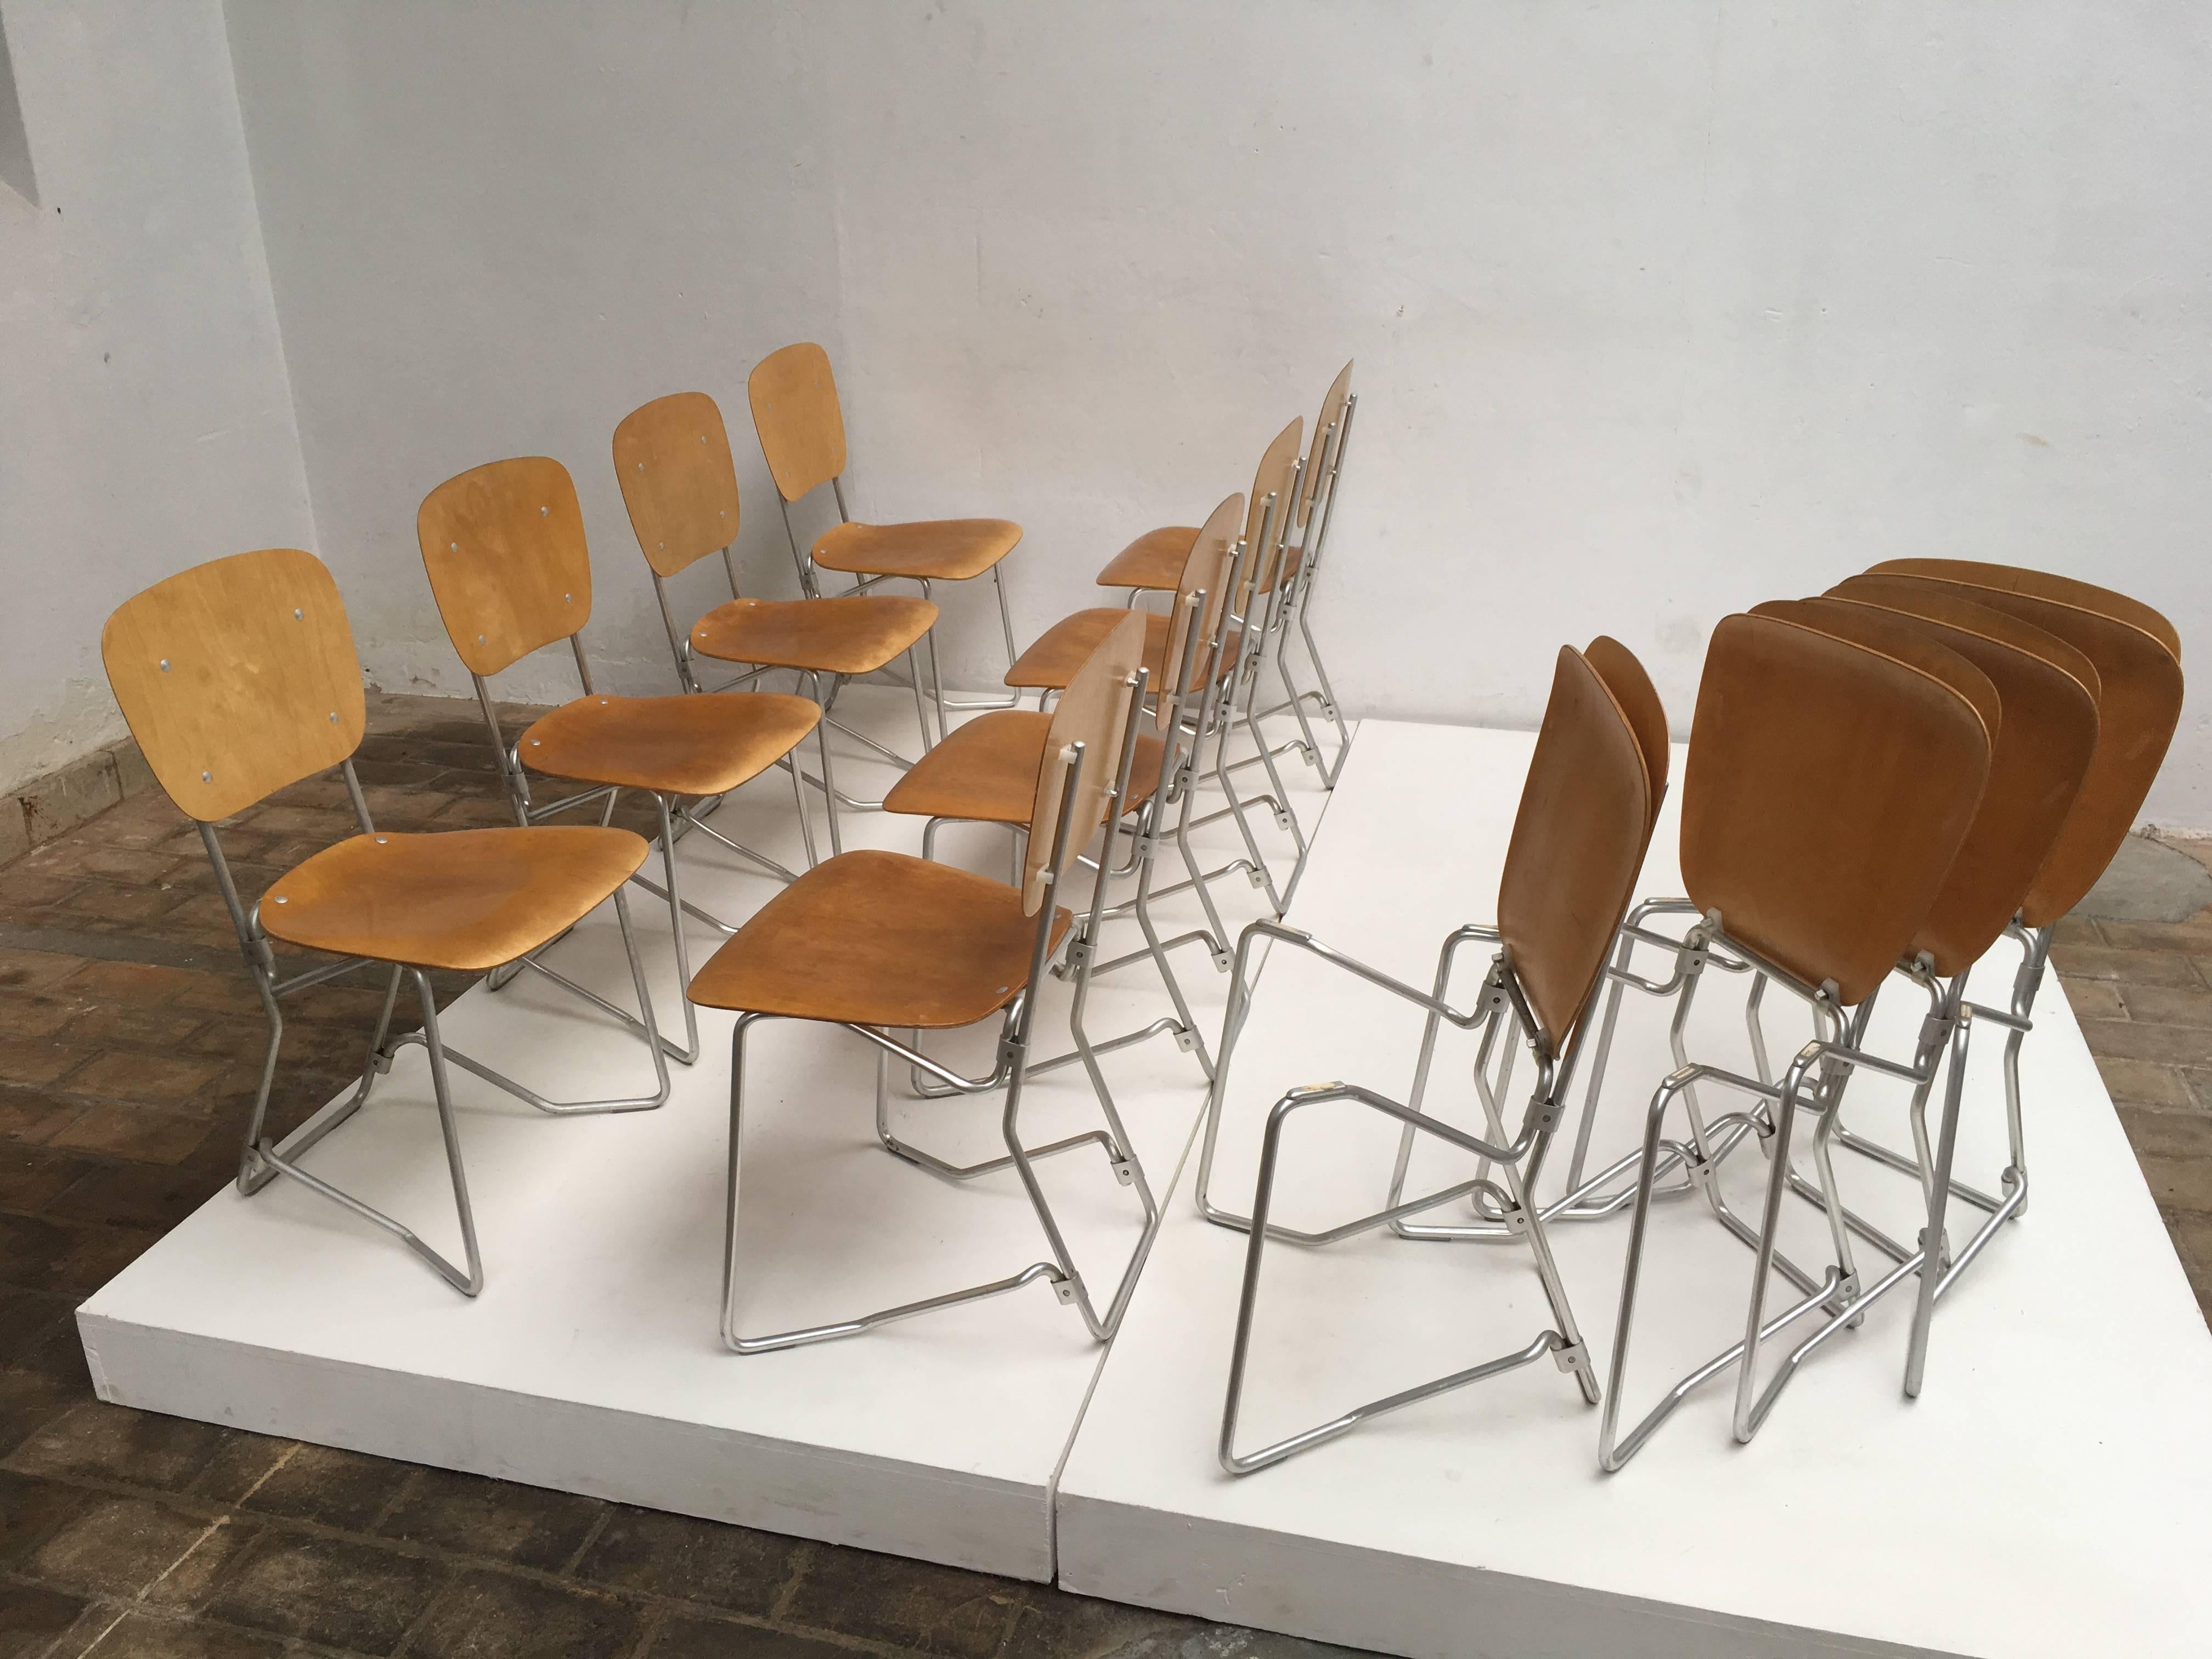 Swiss 12 Birch and Aluminium Chairs by Armin Wirth for Aluflex, Switzerland, 1951 For Sale